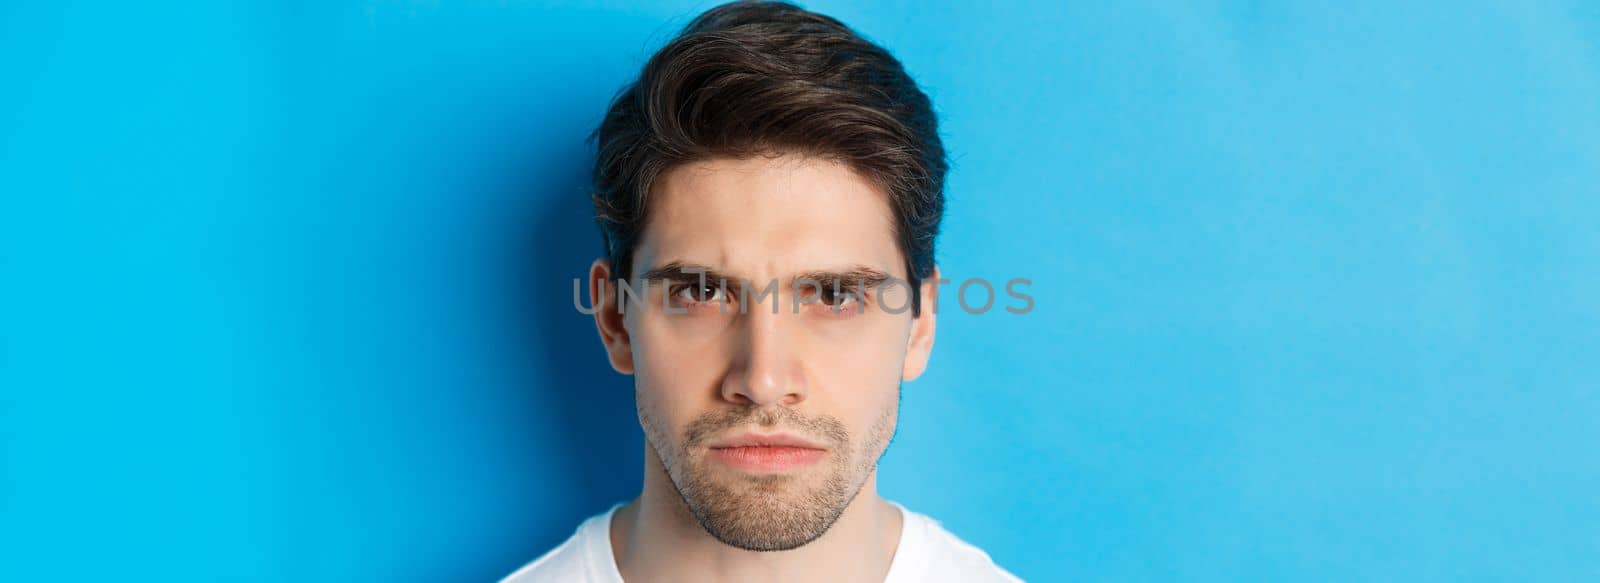 Headshot of angry man frowning, looking disappointed and bothered, standing over blue background.